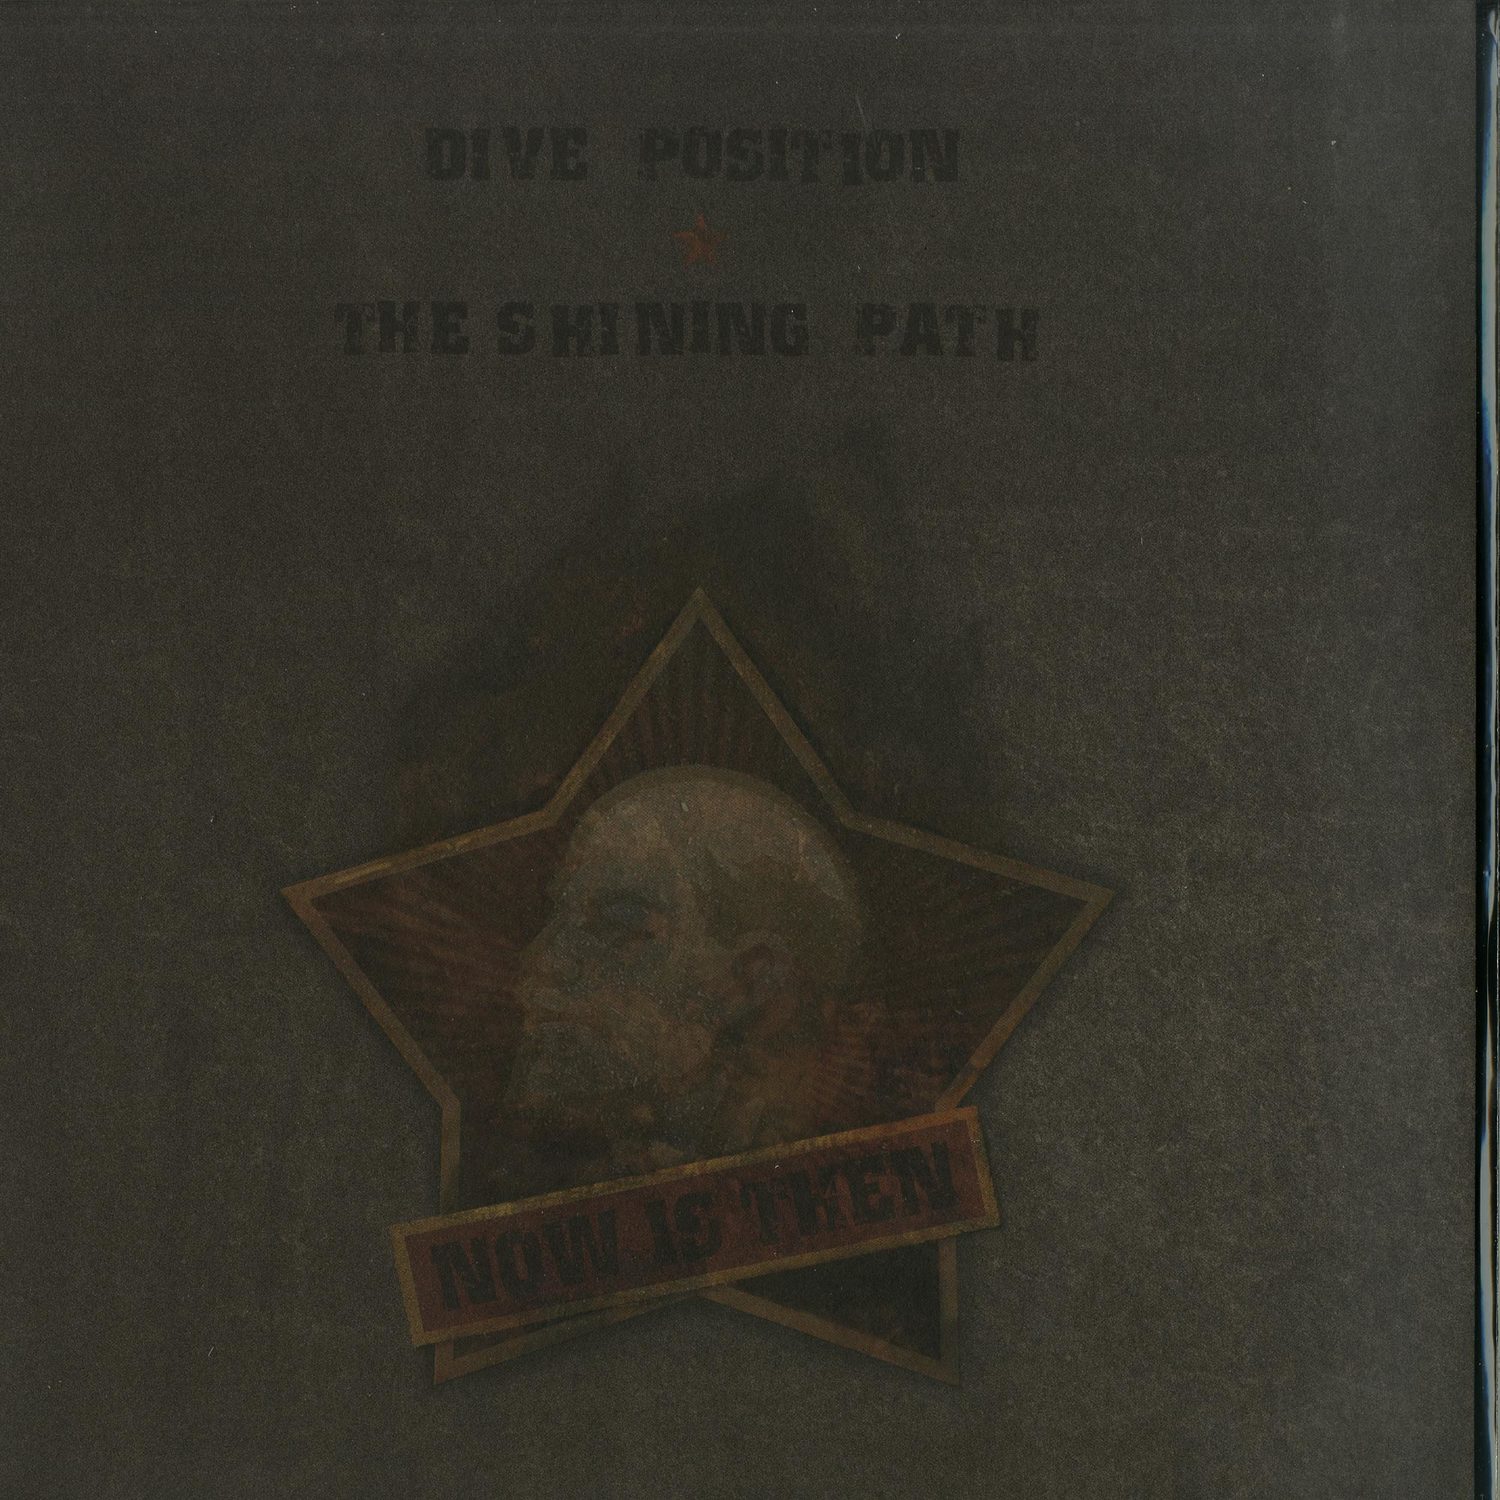 Dive Position / The Shining Path - NOW IS THEN 